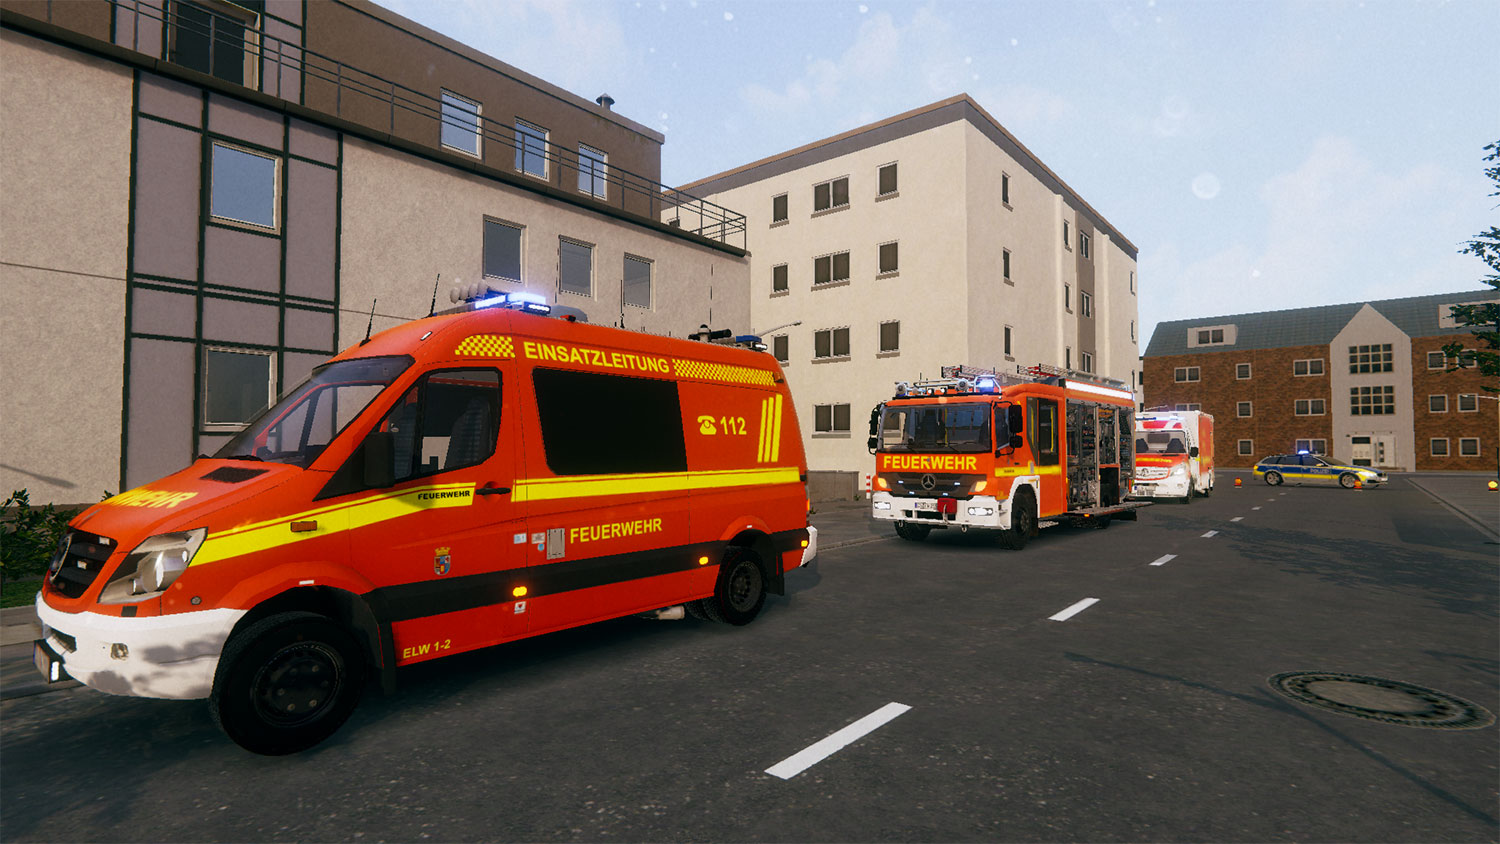 Emergency Call - The Attack Squad PS5